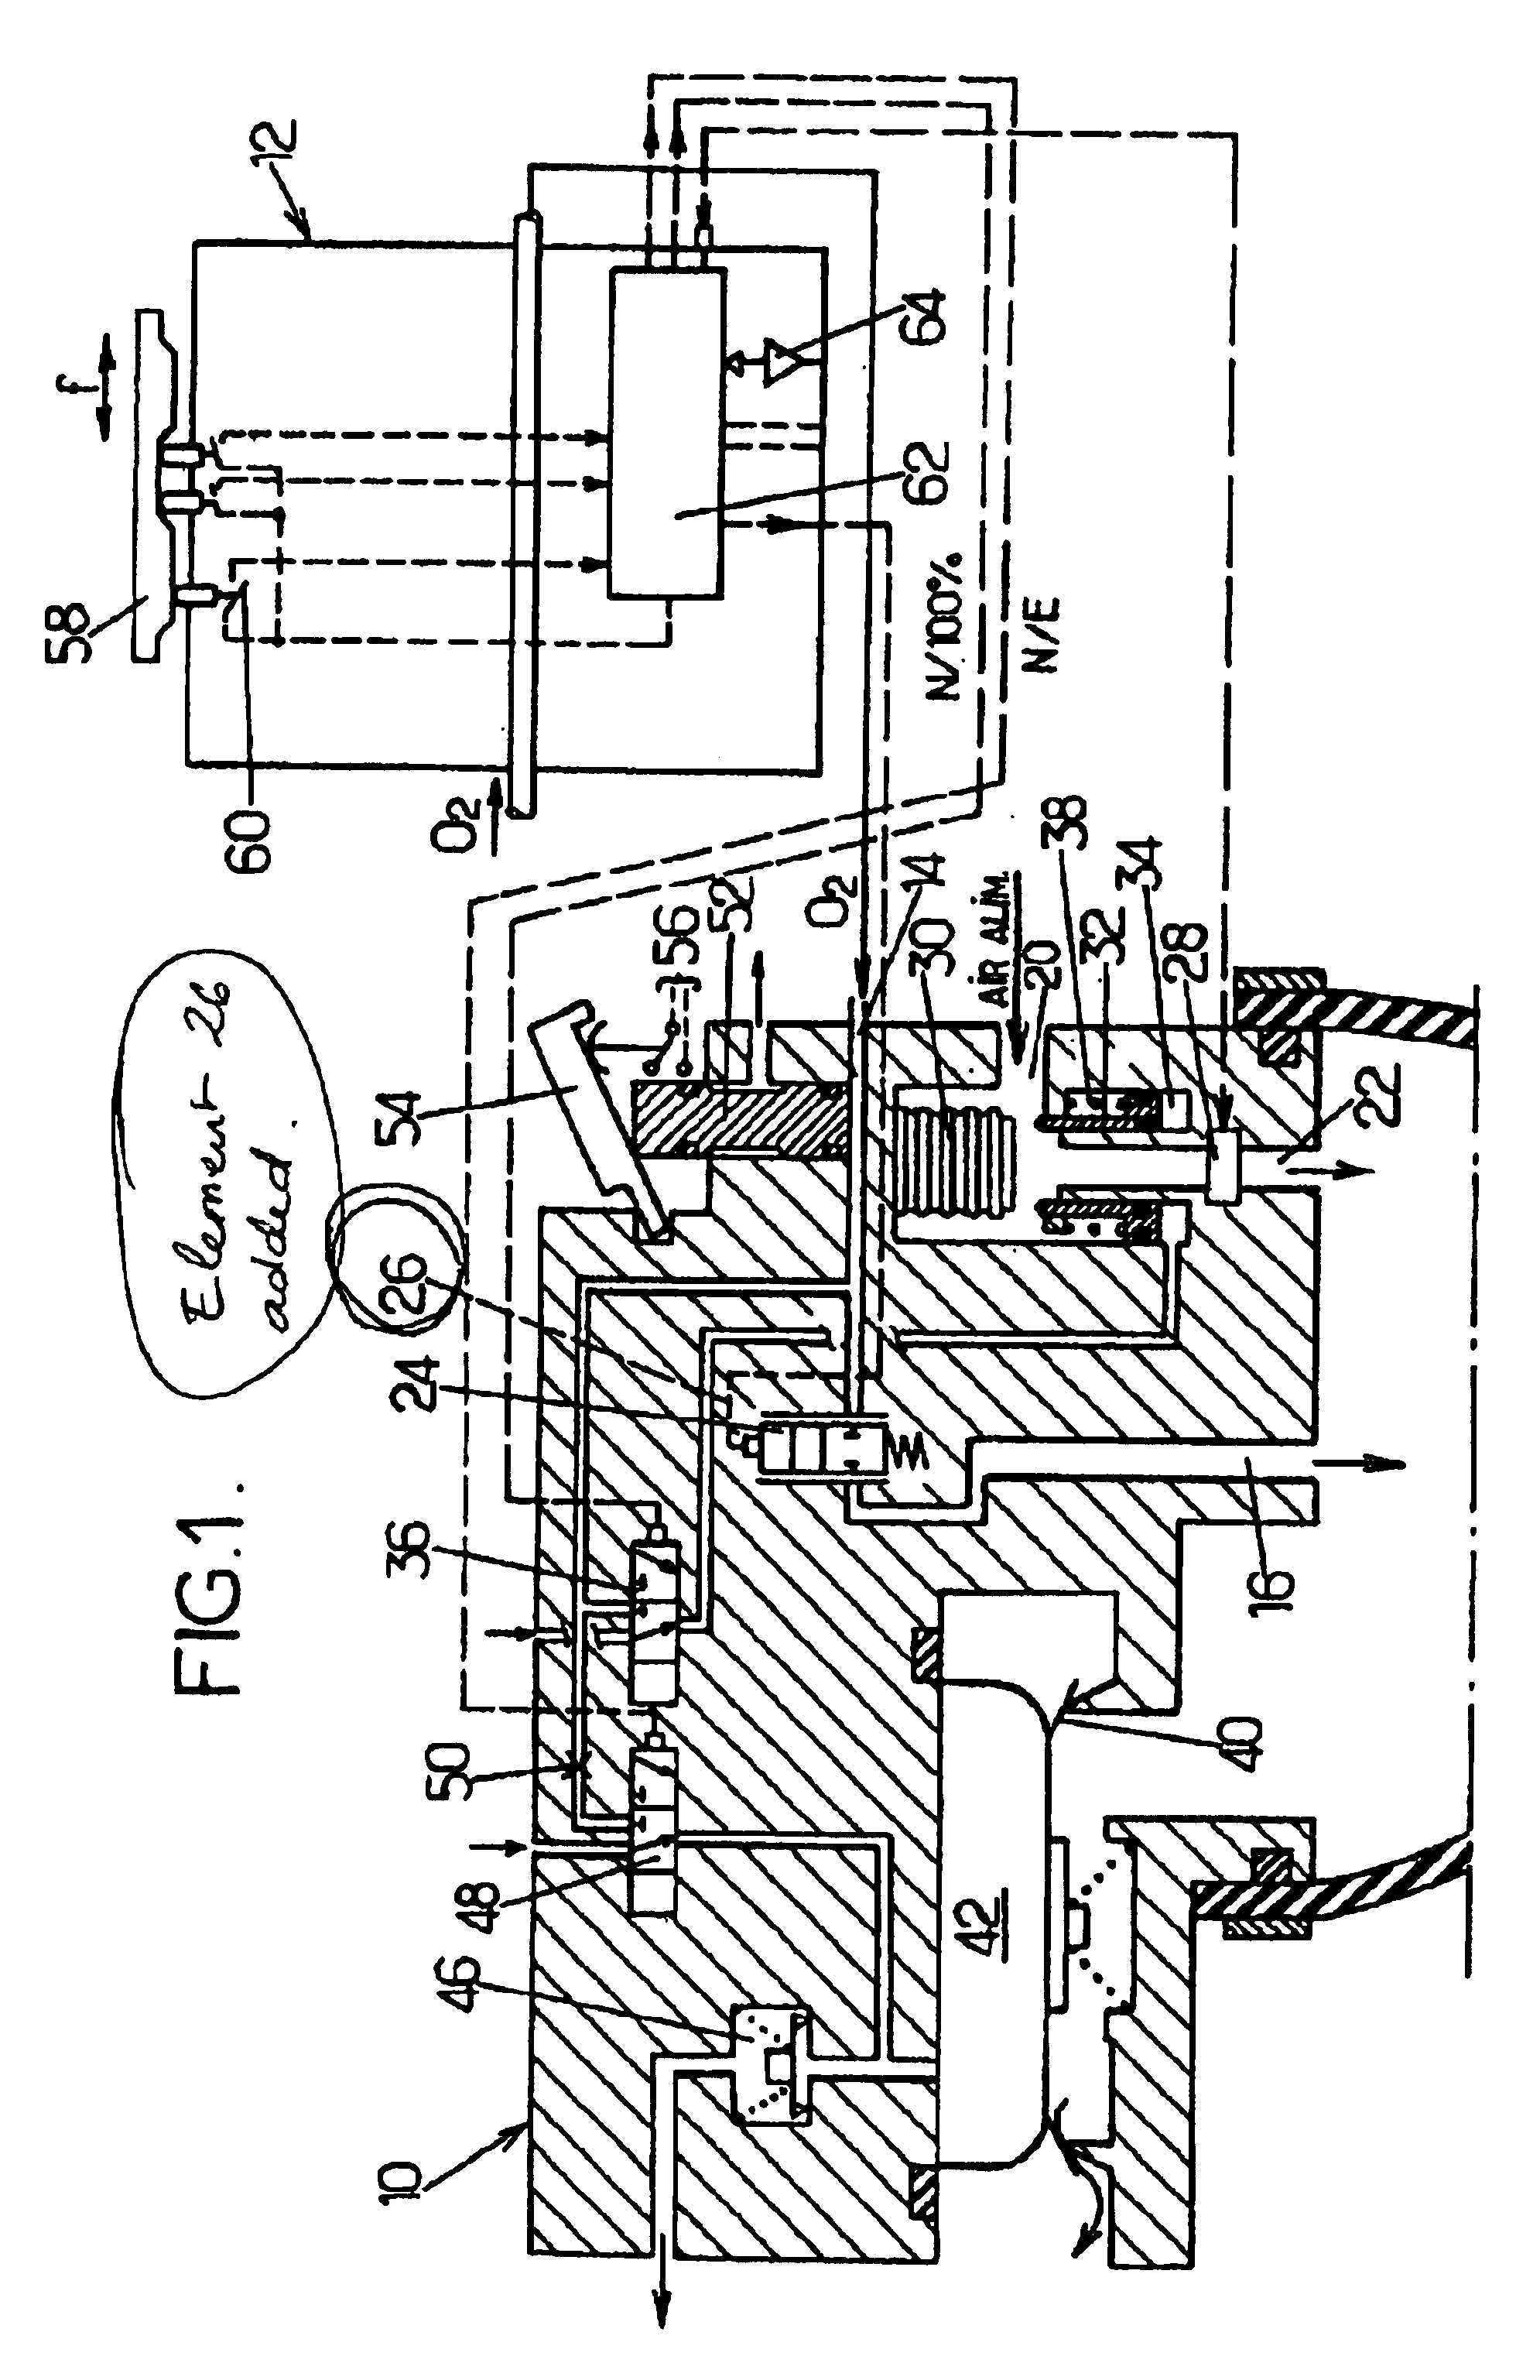 Dilution regulation method and device for breathing apparatus